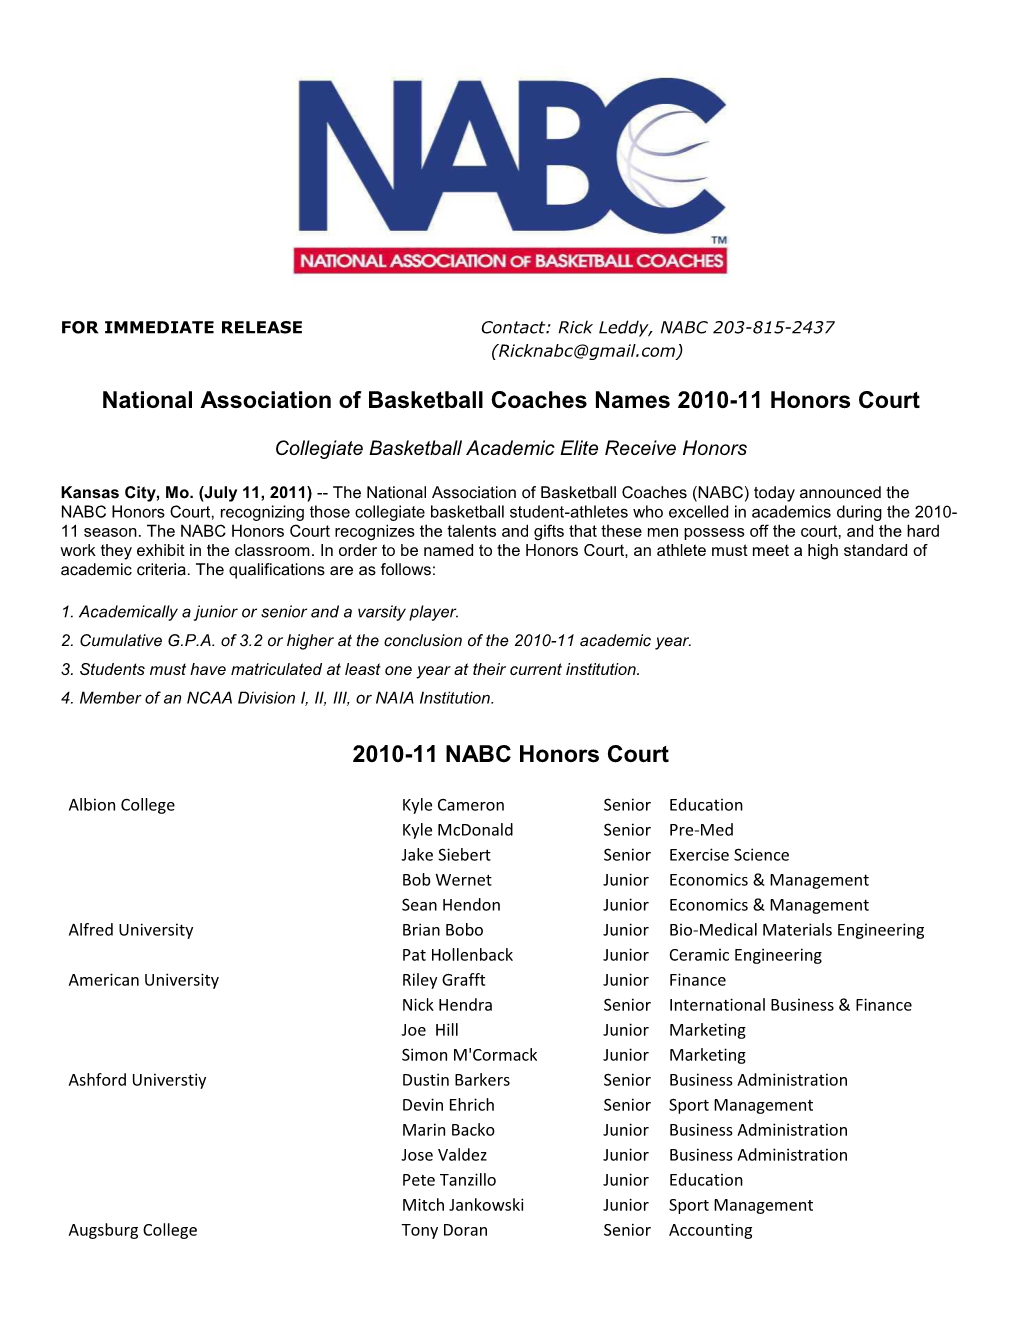 National Association of Basketball Coaches Names 2010-11 Honors Court